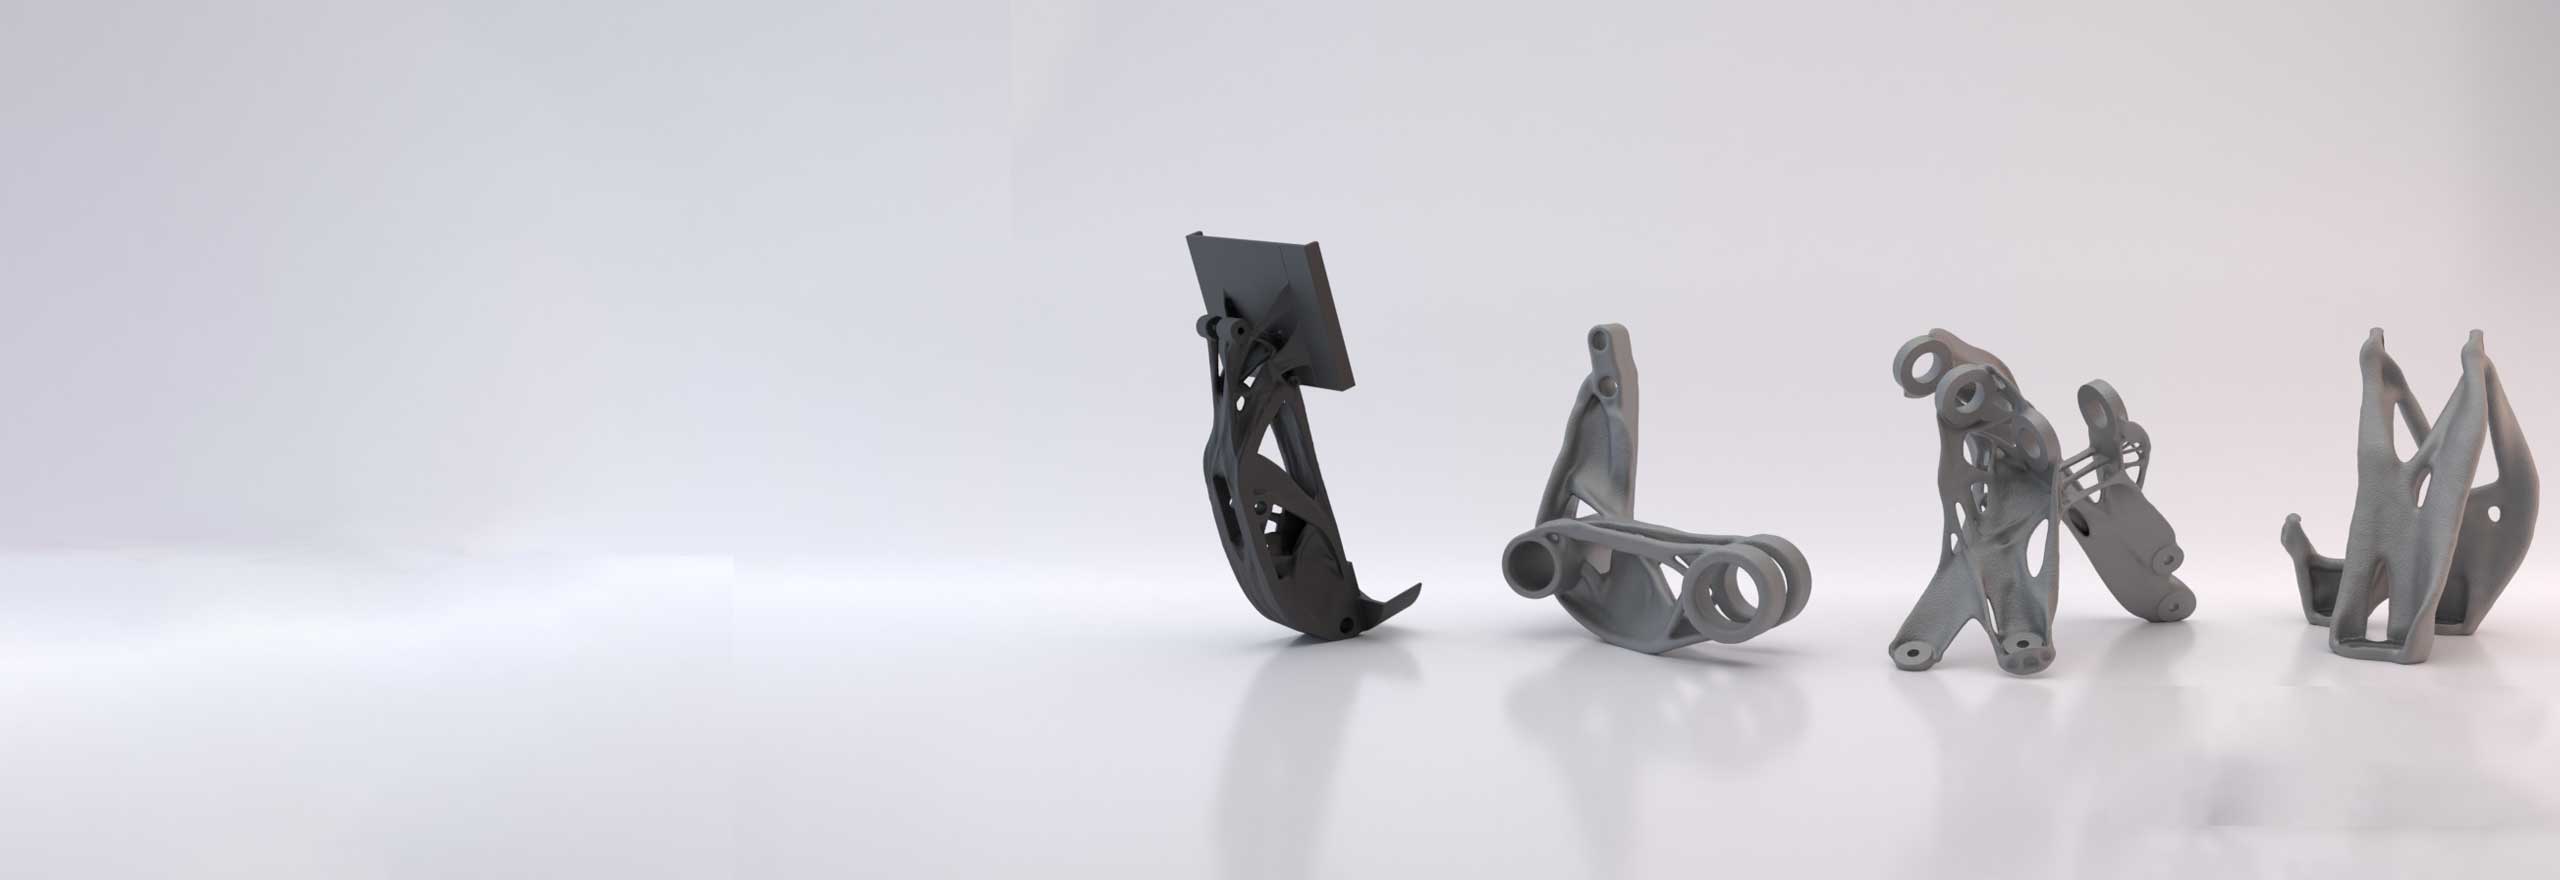 Four uniquely structured 3D printed parts with an organic aesthetic.